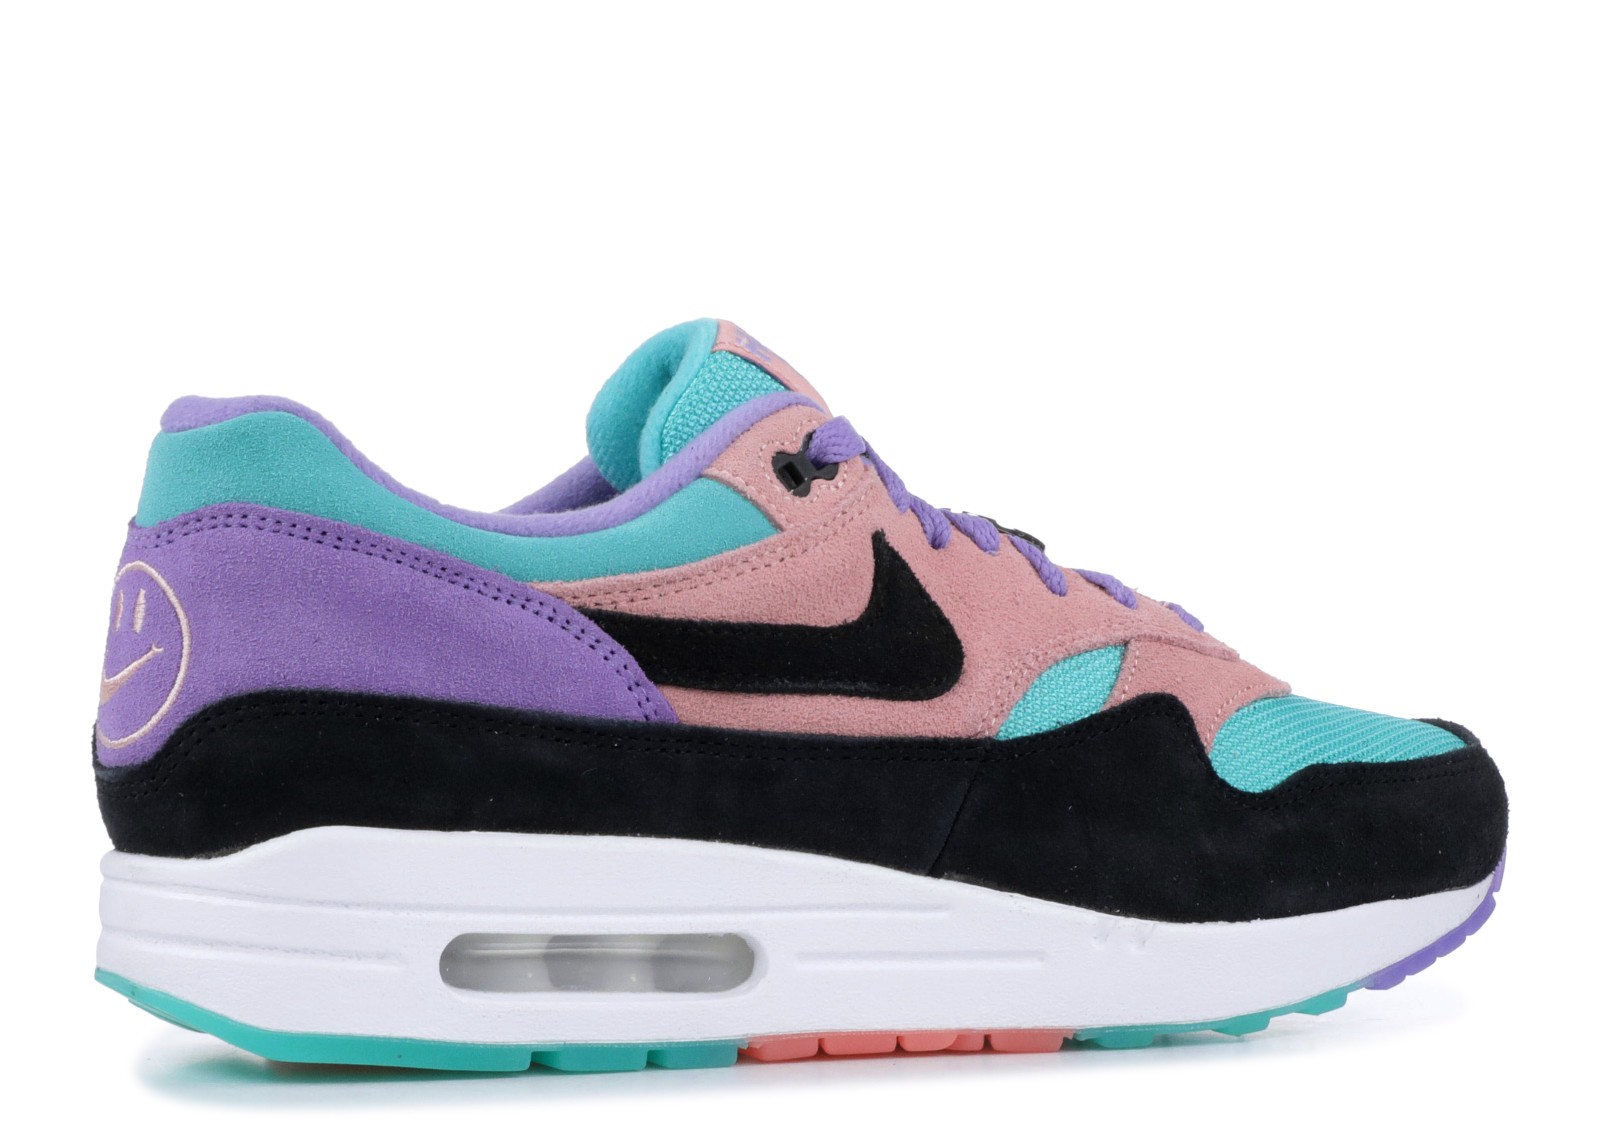 Monetair Geneigd zijn Kritiek MultiscaleconsultingShops - Nike Waffle Racer Crater - Nike Air Max 1 Have  A Nike Day BQ8929 - 500